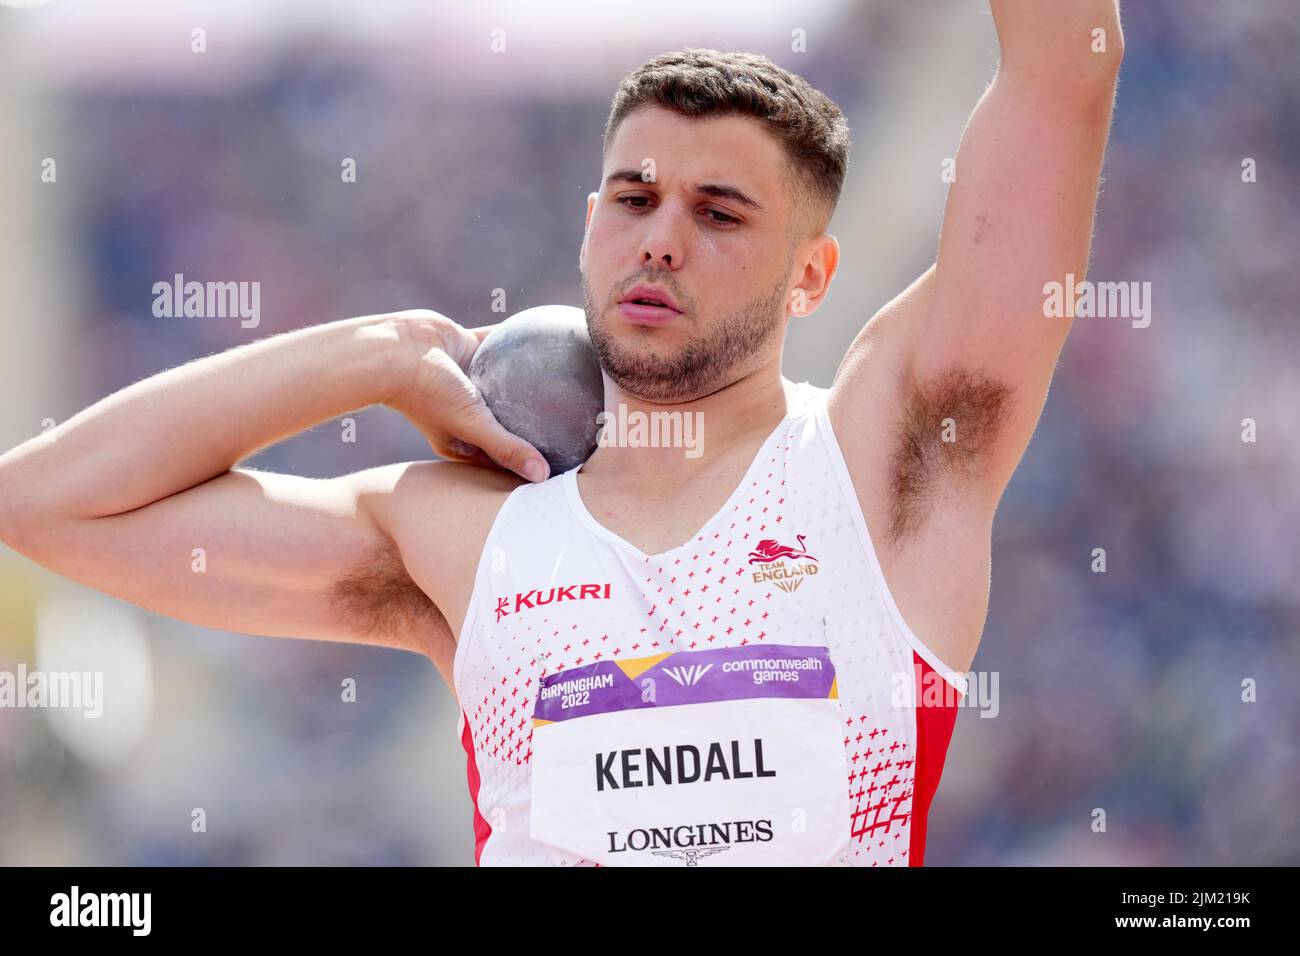 England's Harry Kendall in action the Men's Decathlon Shot Put during the at Alexander Stadium on day seven of the 2022 Commonwealth Games in Birmingham. Picture date: Thursday August 4, 2022. Stock Photo